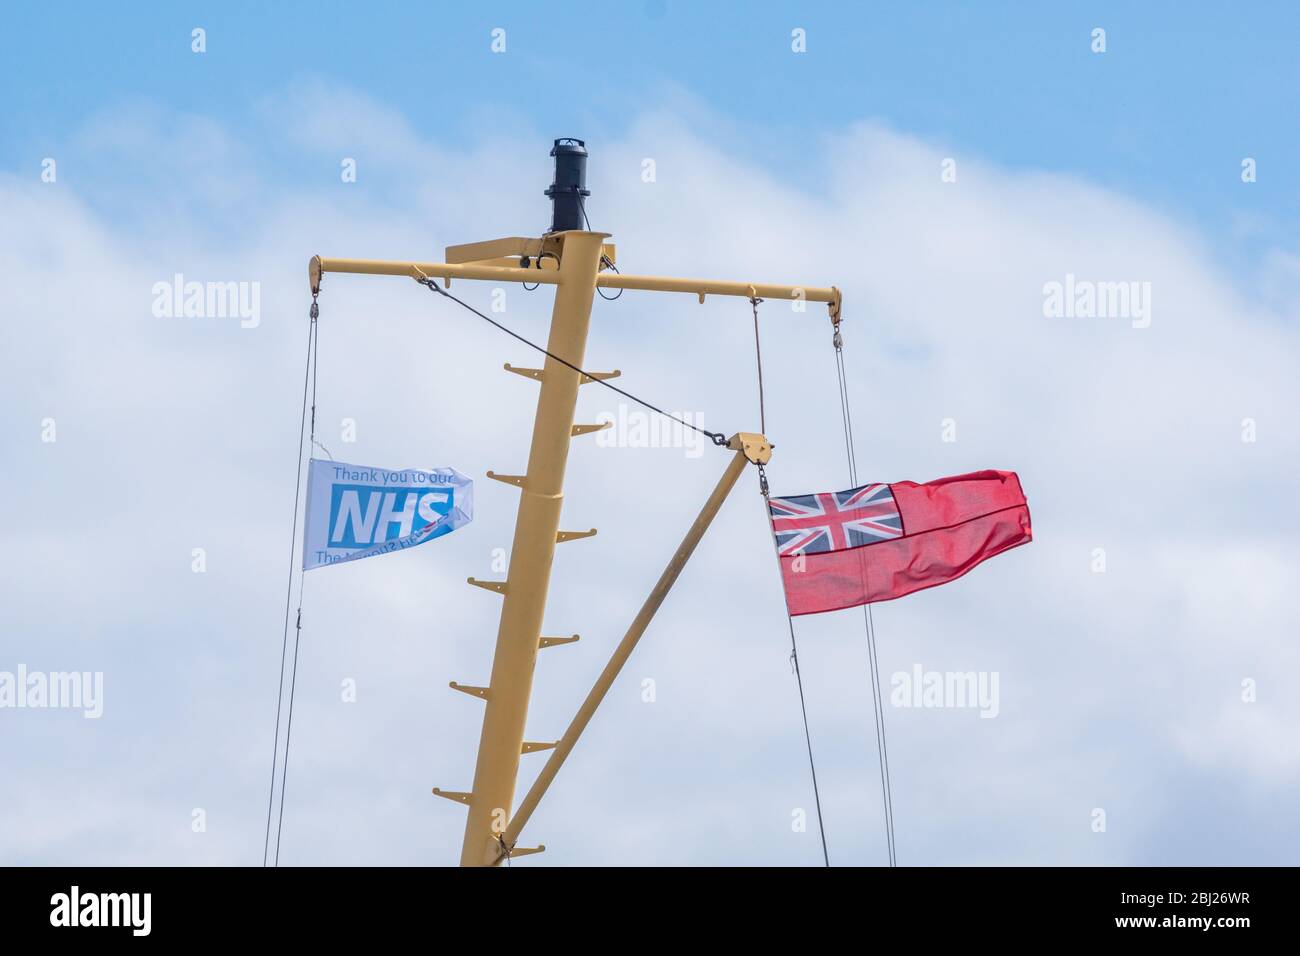 NHS, Thank you heroes flag, with red ensign flying on mast on Calmac Ferry Lord of the Isles in South Uist Outer Hebrides, Scotland Stock Photo